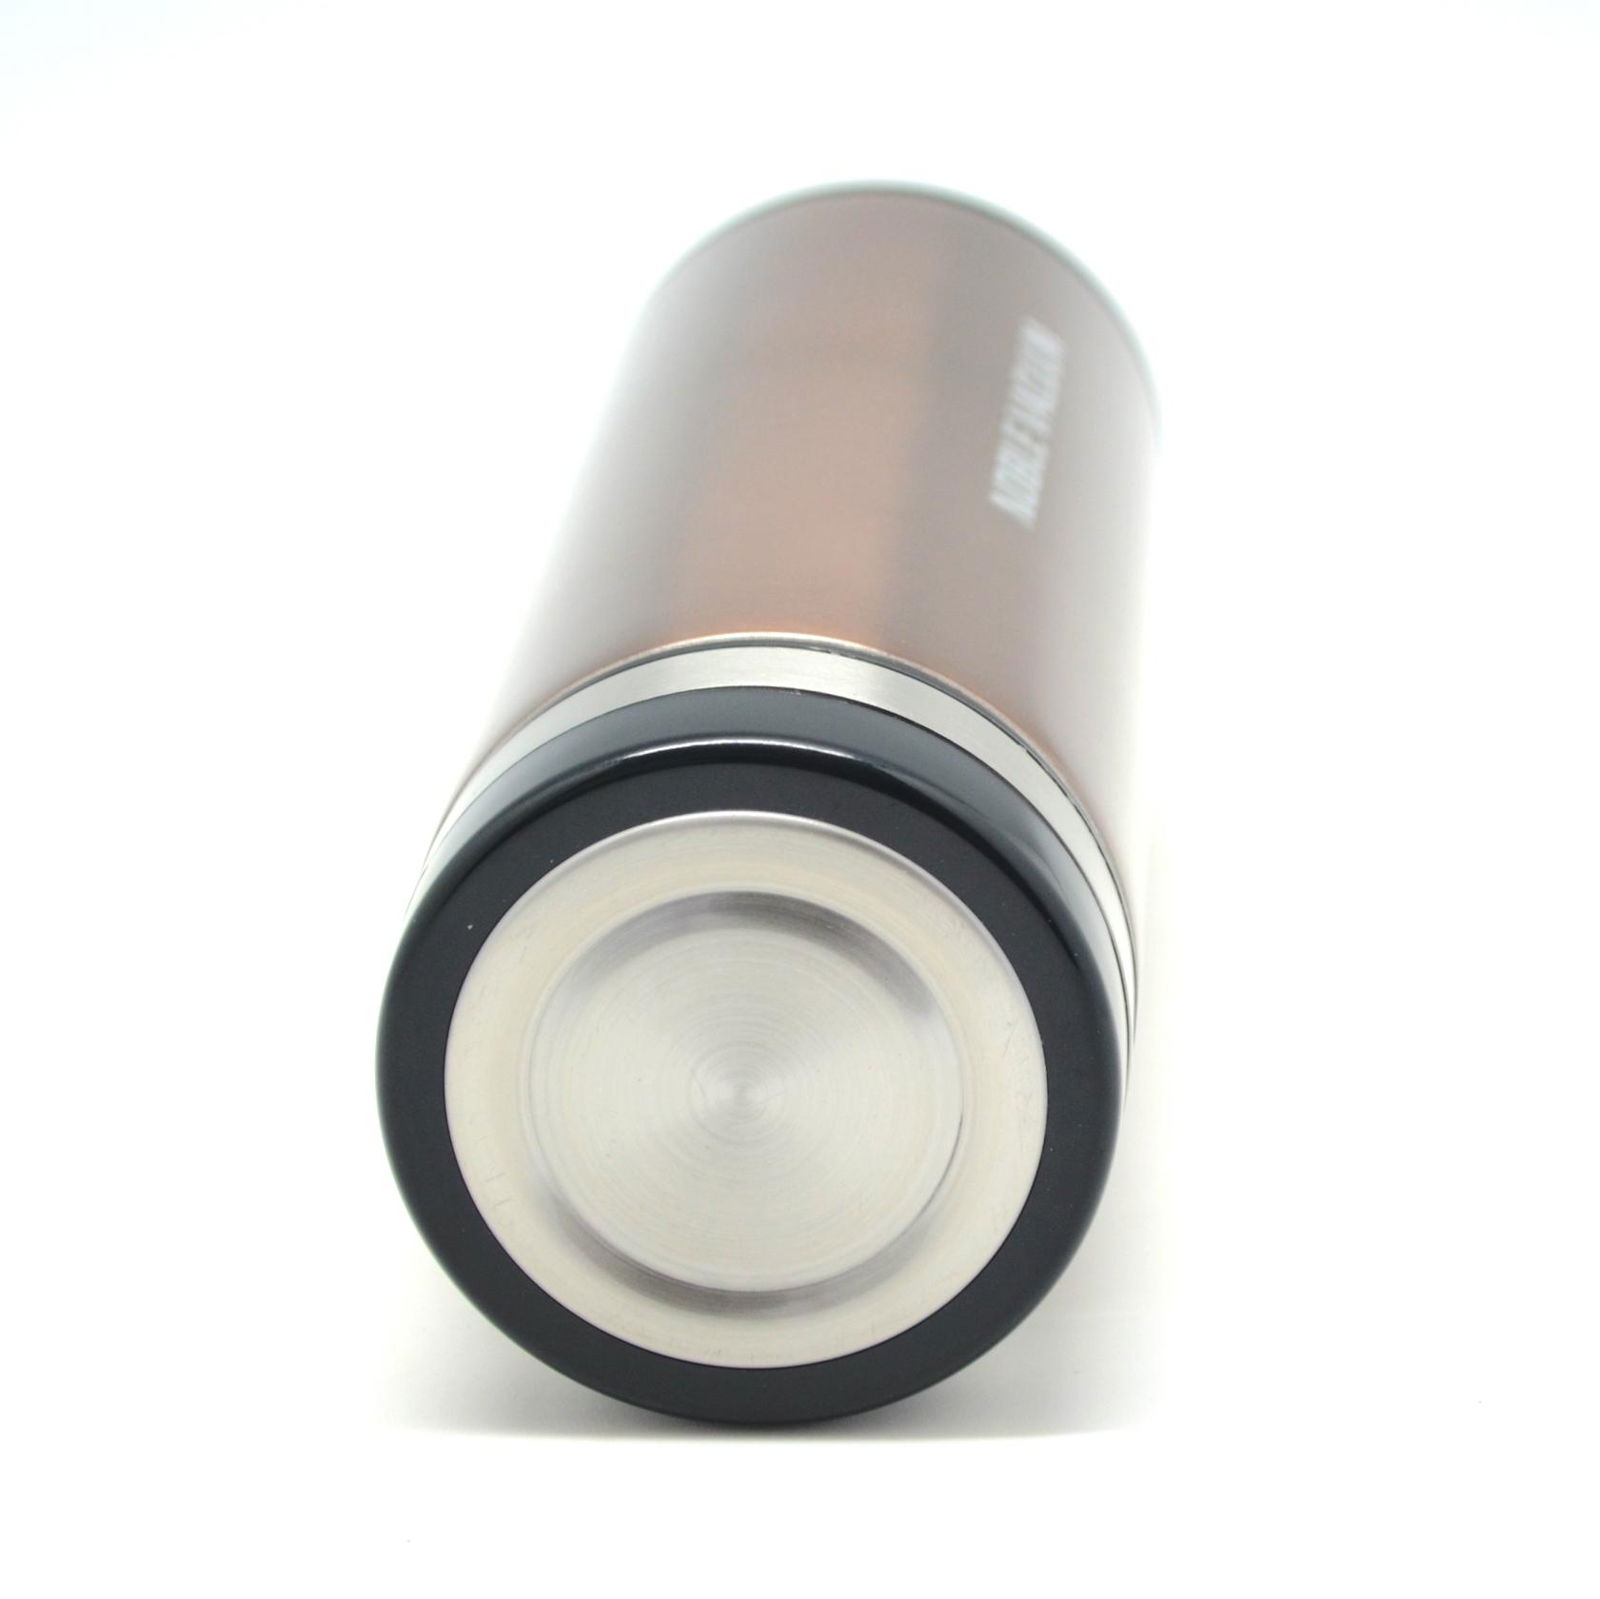 Double wall stainless steel vacuum flask thermal mug cup BLUESKY-1 4